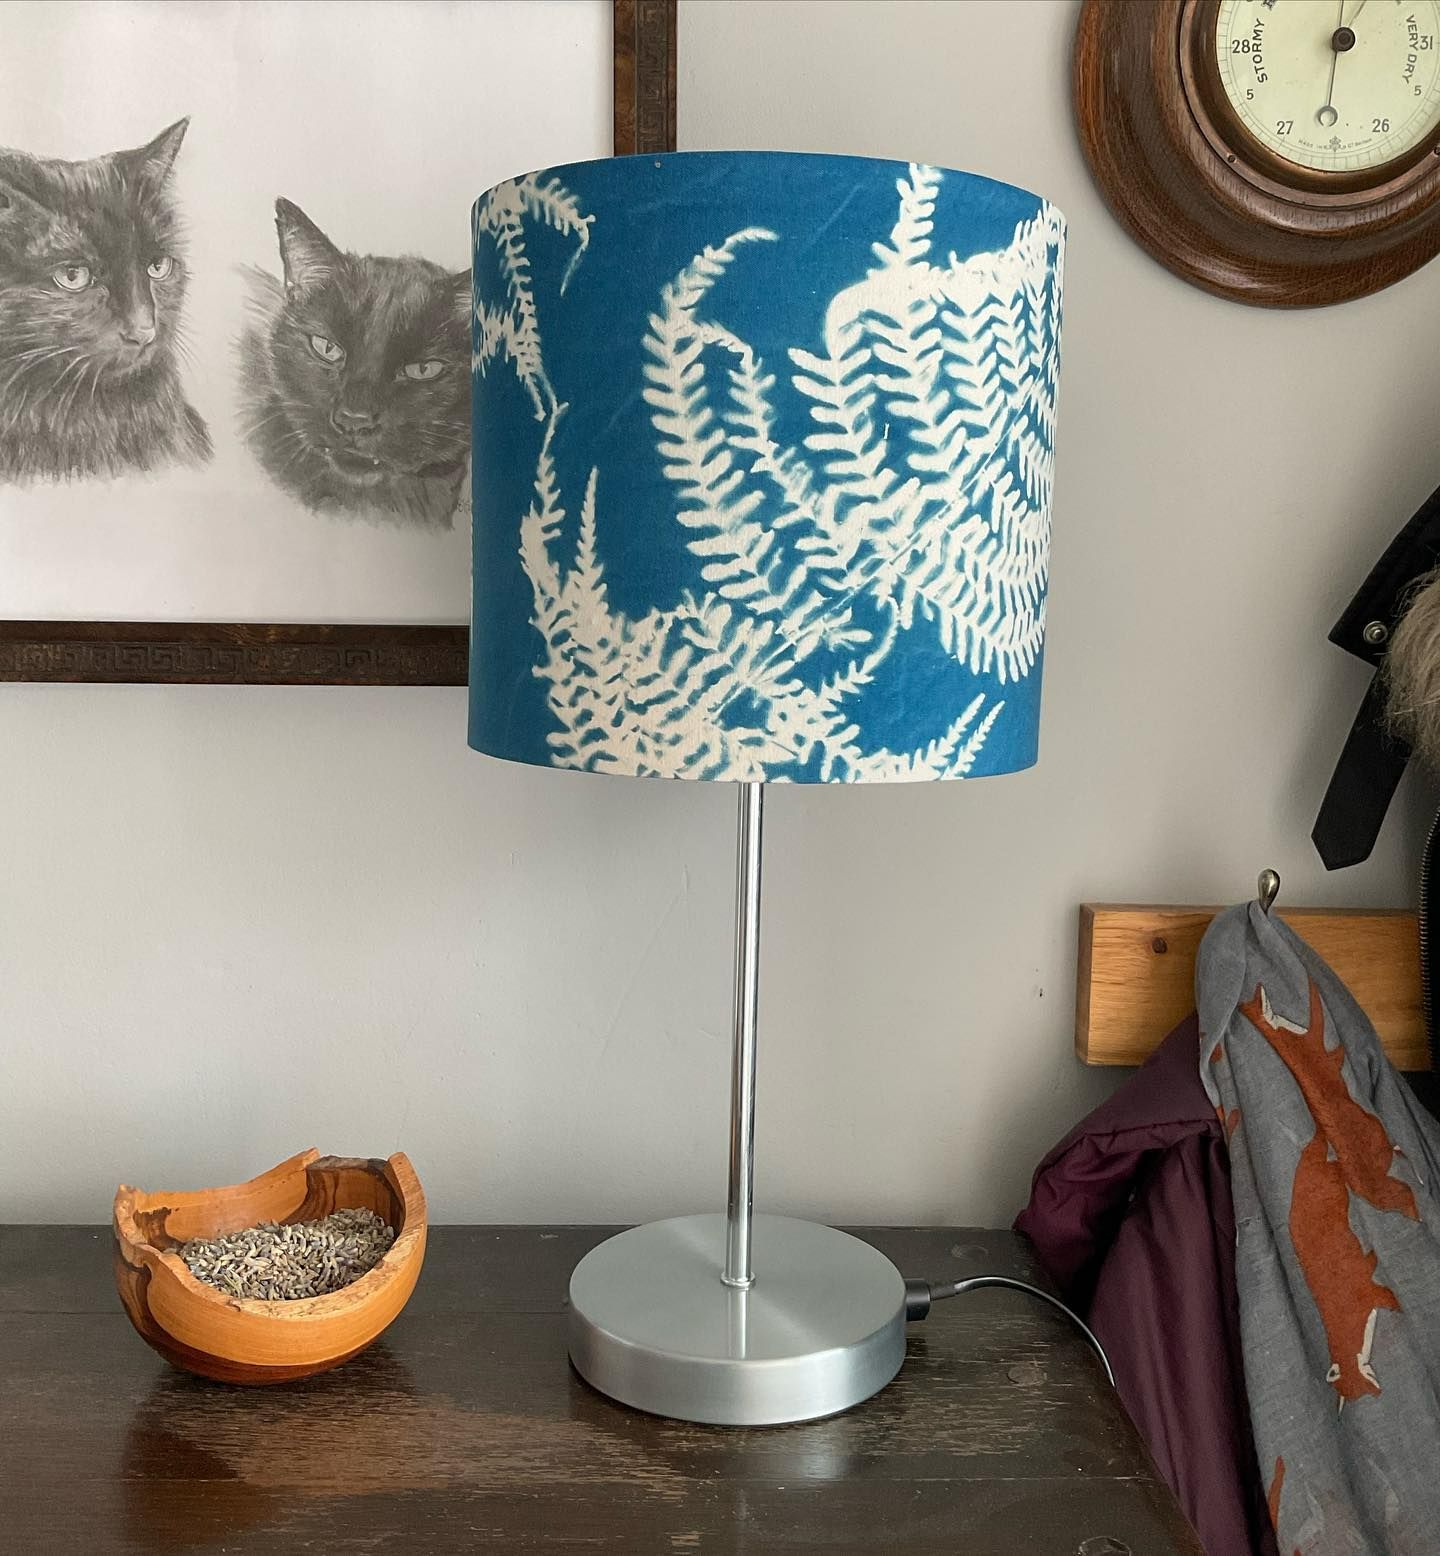 A 20cm drum lampshade is a side board. The lampshade is blue with a fern print.